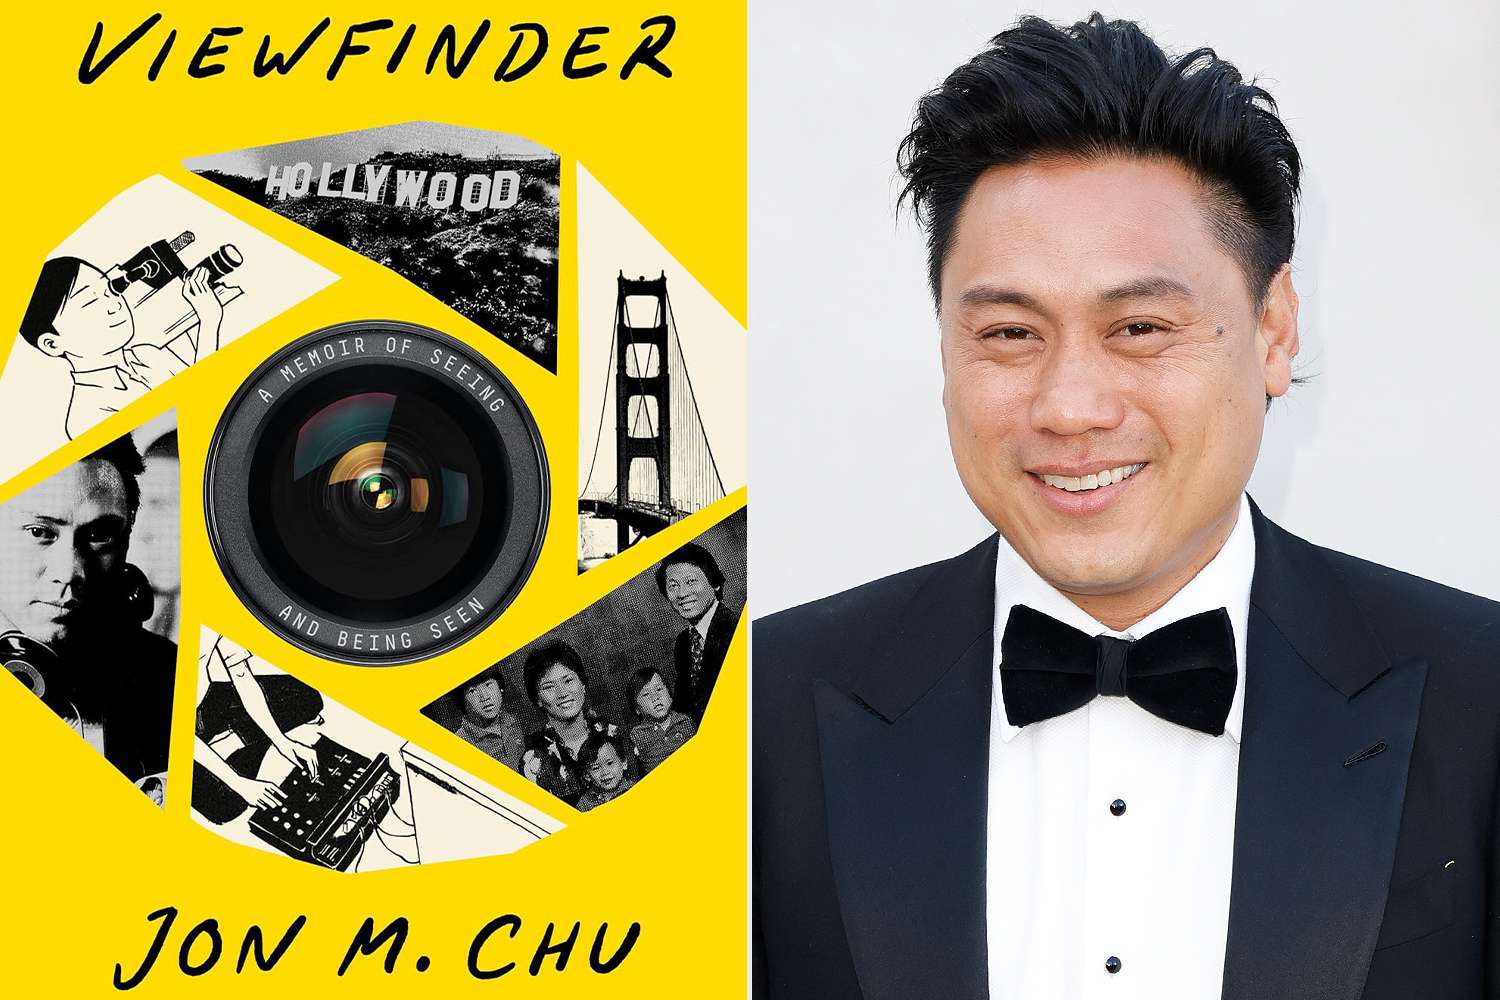 Dancing Off with Miley Cyrus, Confronting Justin Bieber: The Biggest Bombshells from Jon M. Chu's New Memoir